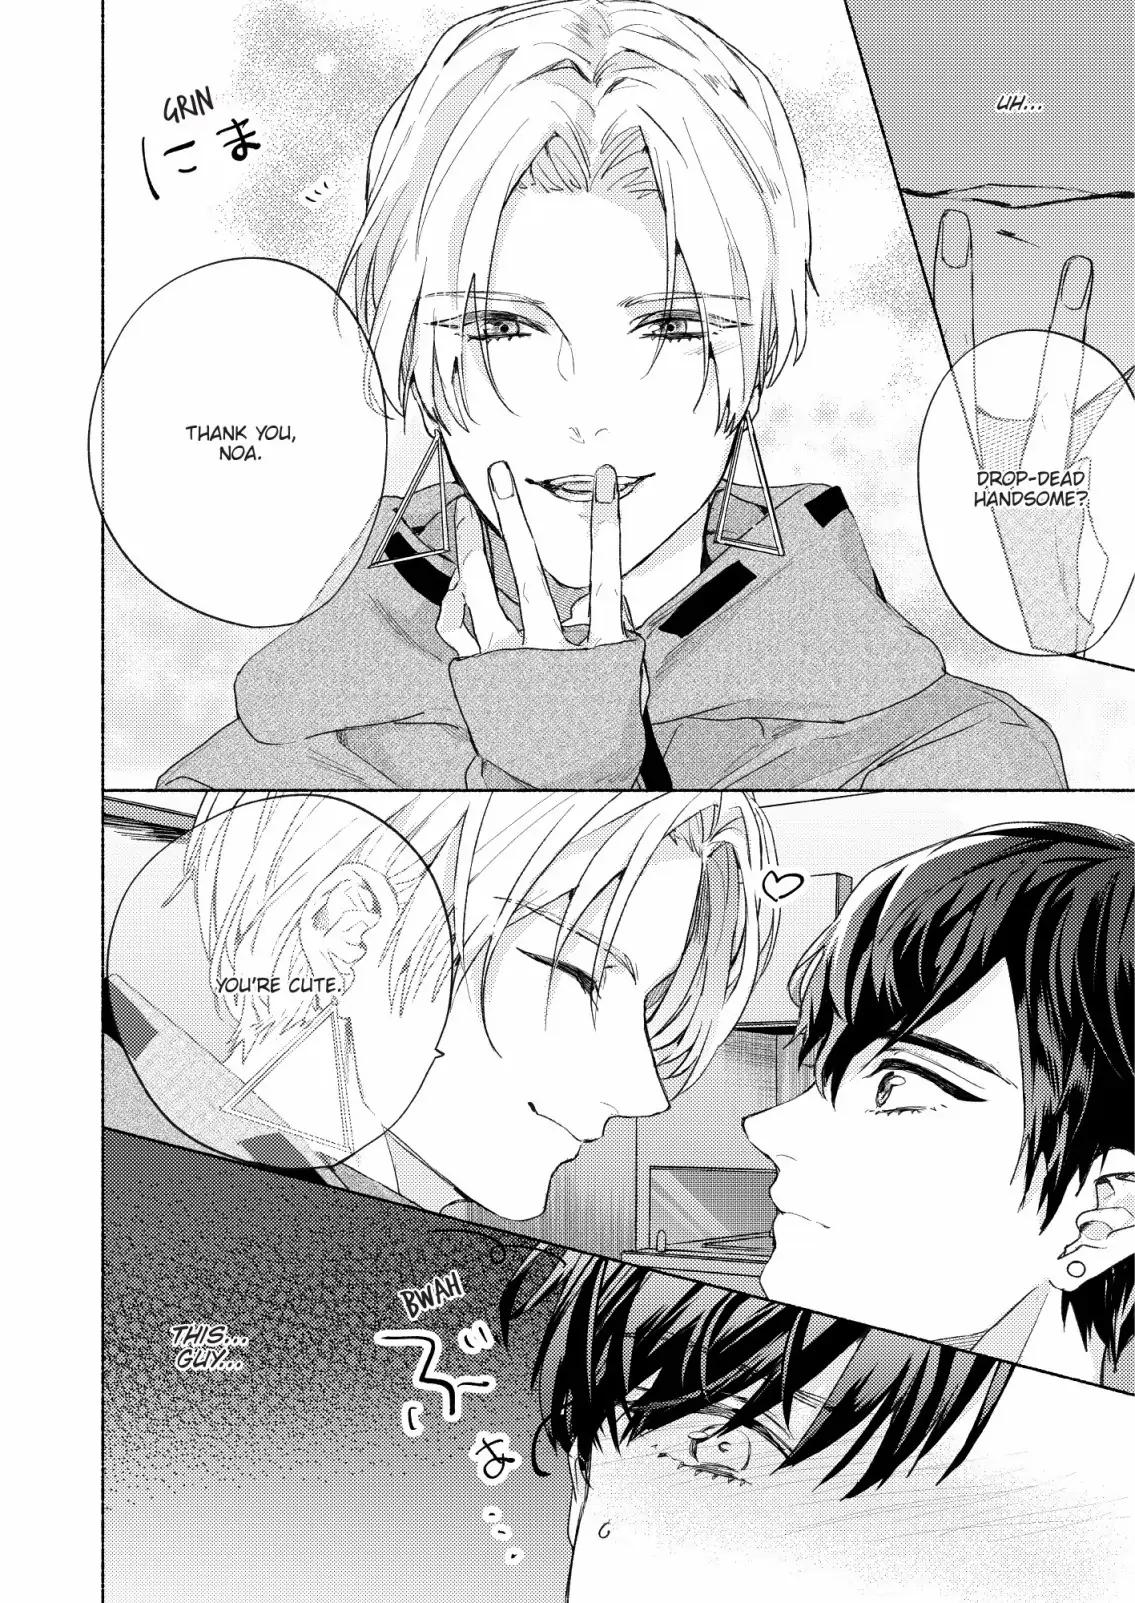 Kiss Me Crying Ch.1 Page 10 - Mangago